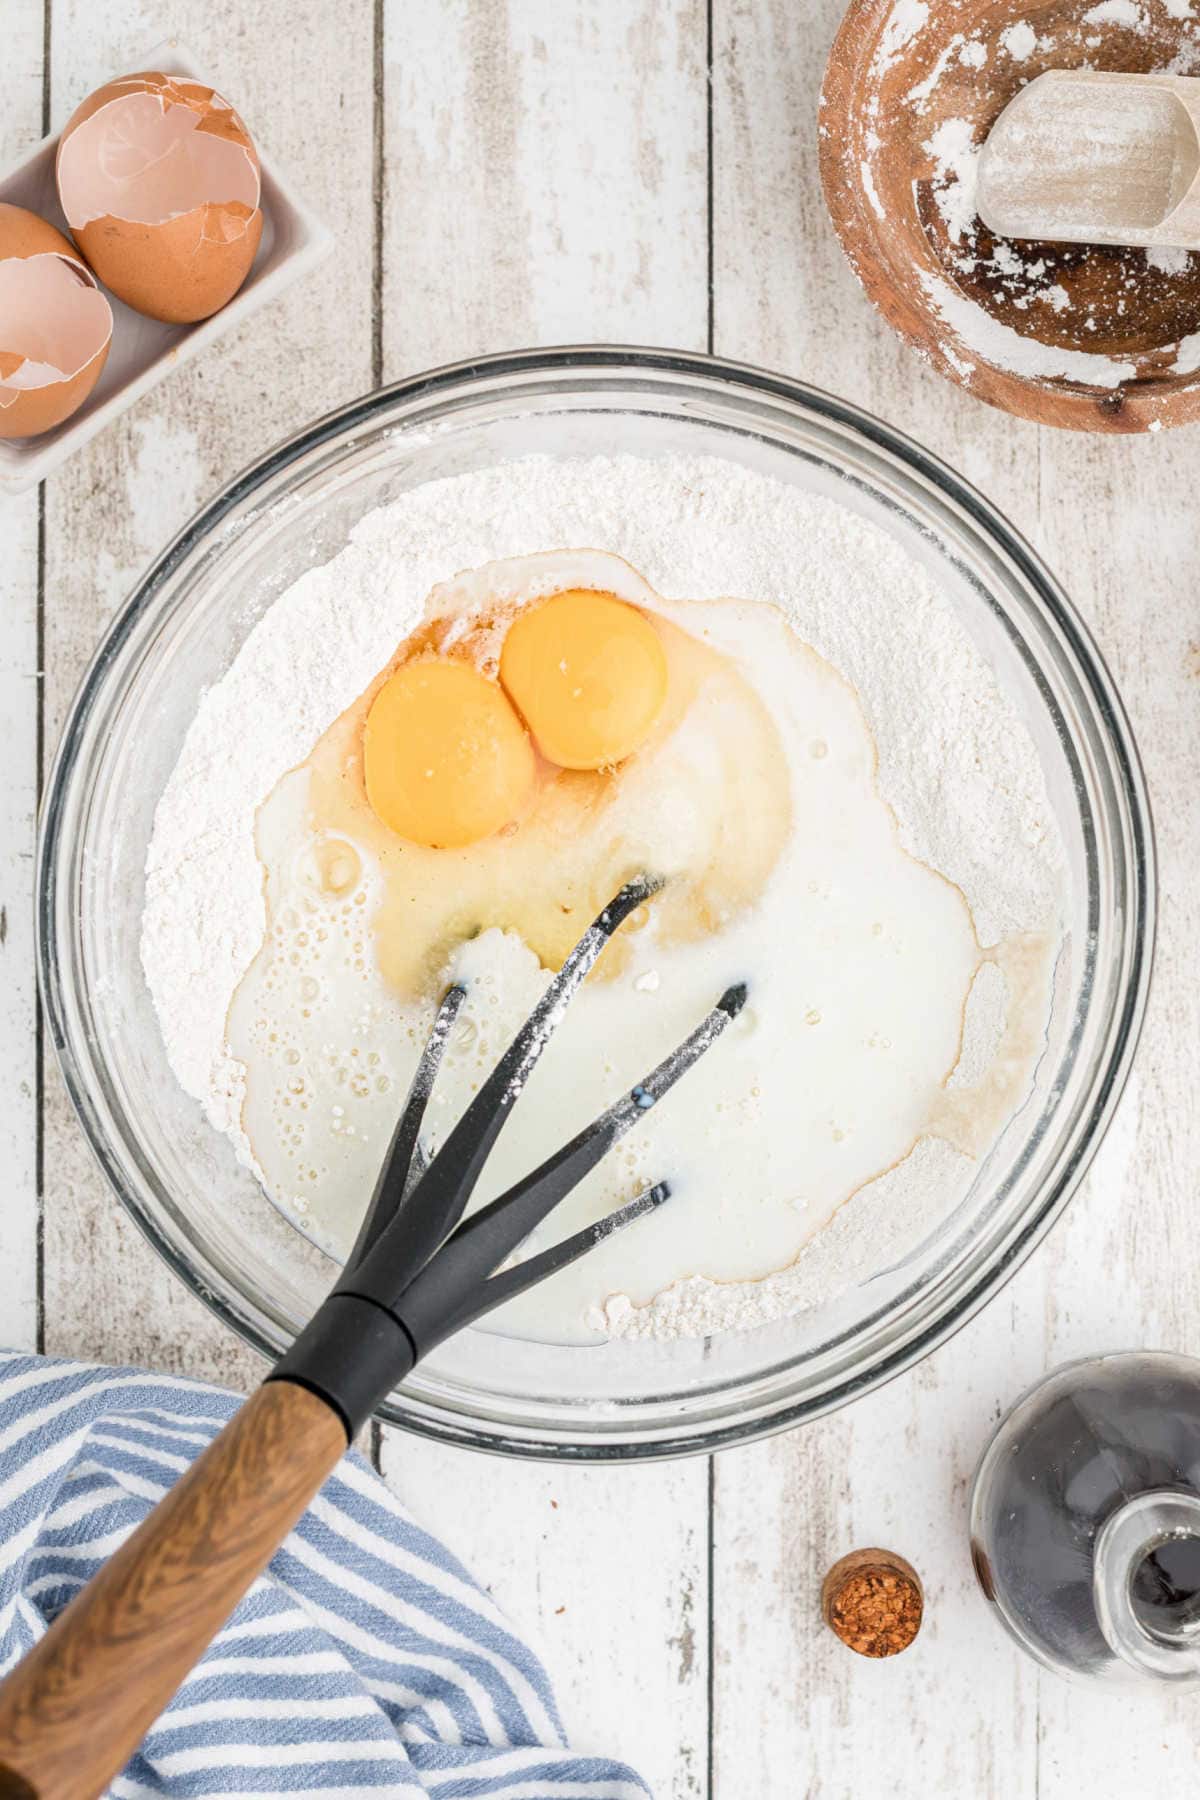 A bowl with flour, eggs, and buttermilk being whisked together.